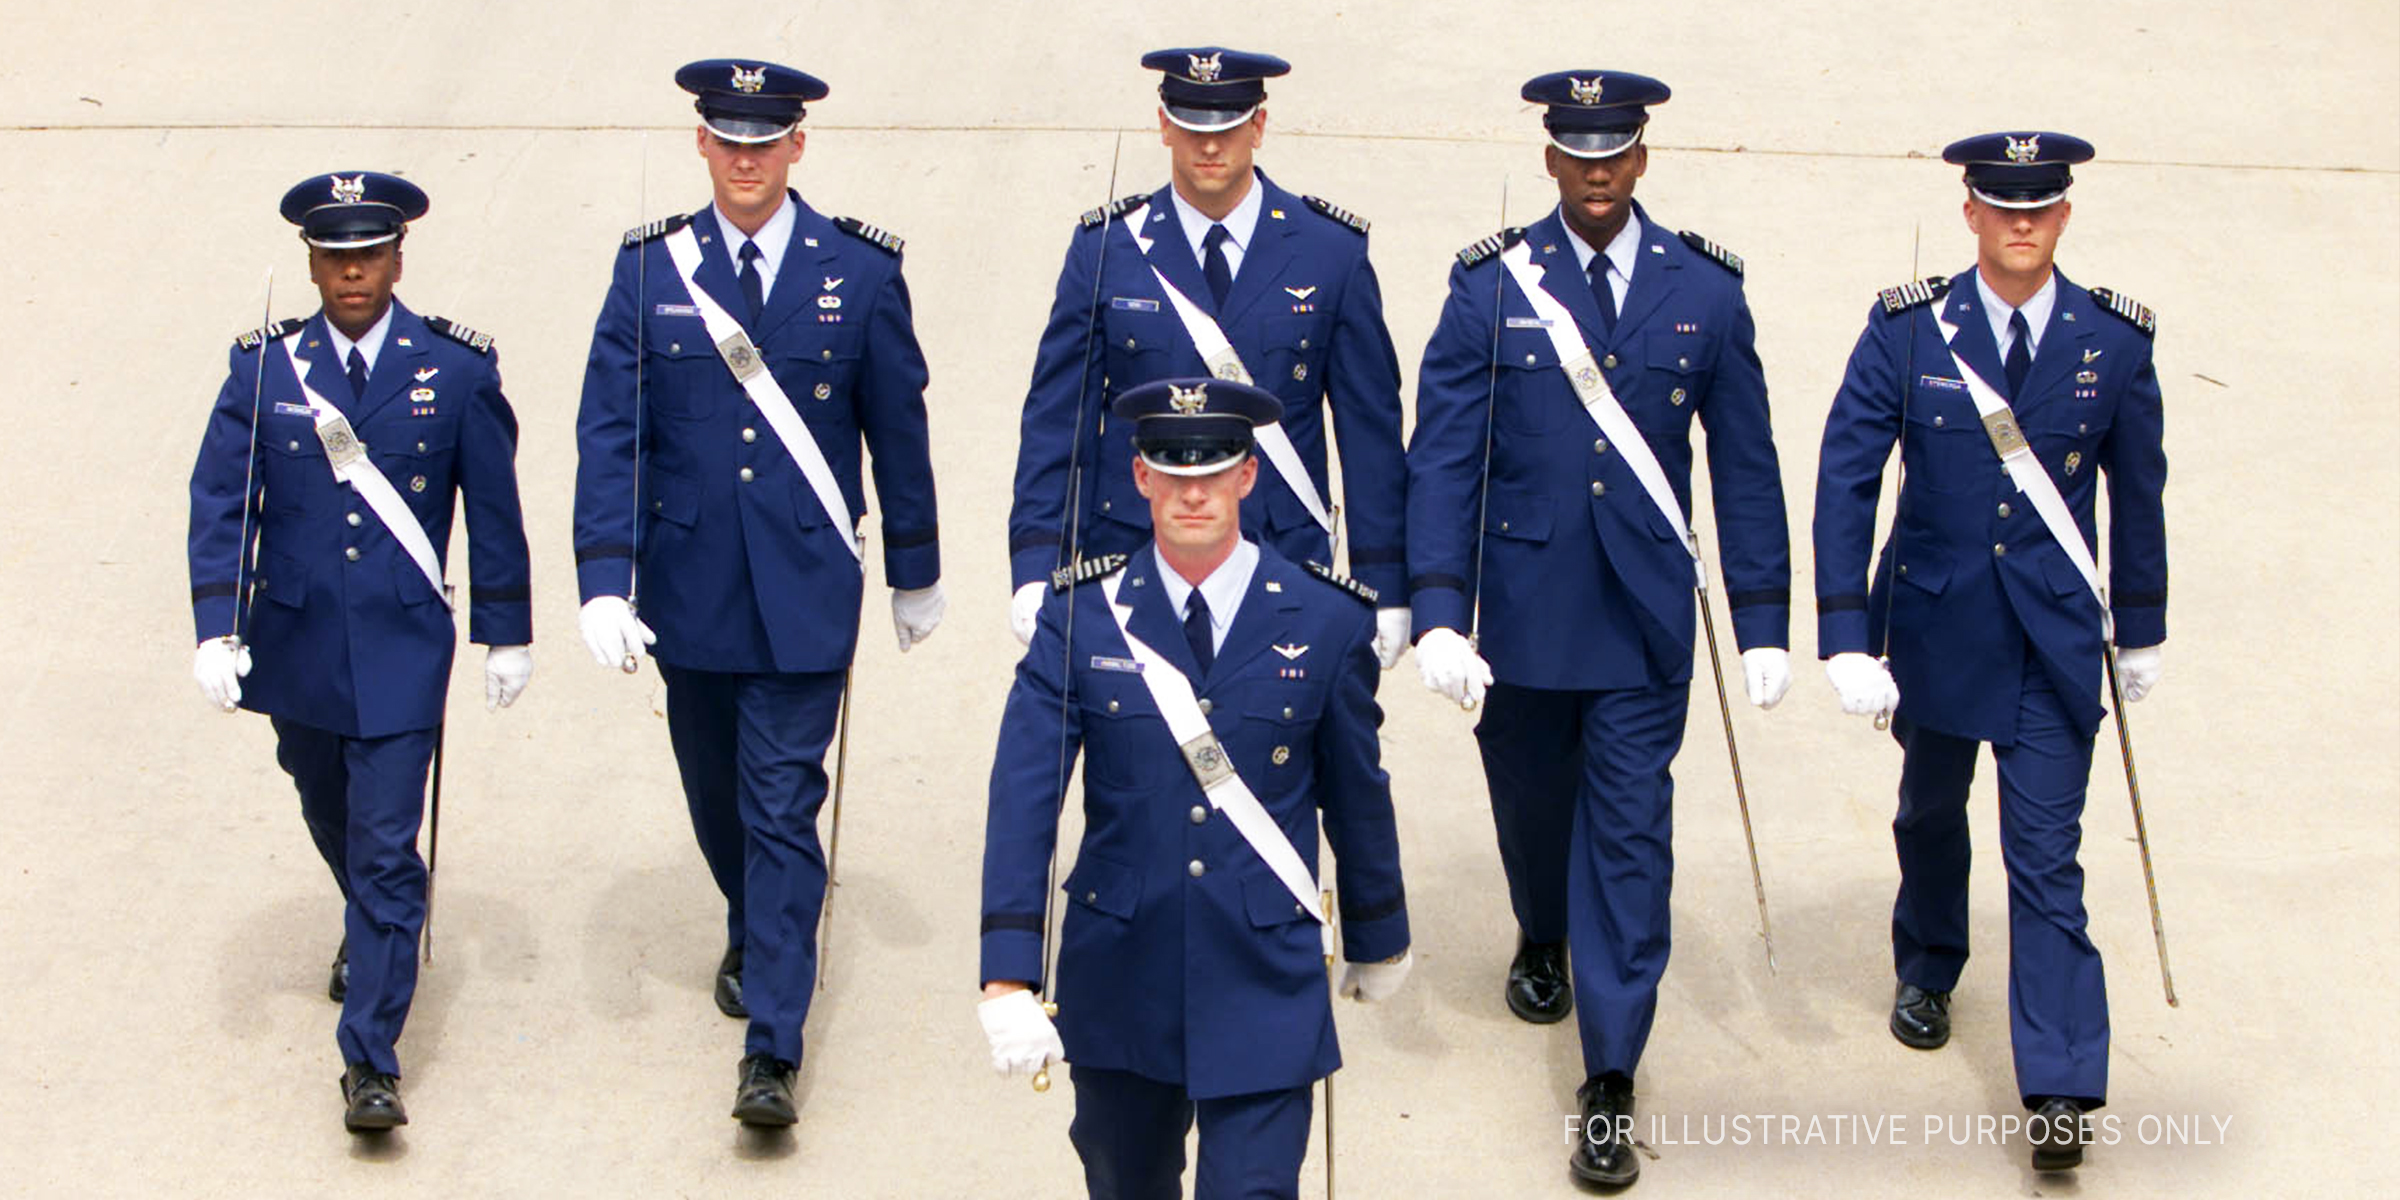 A group of six cadets marching together | Source: Getty Images